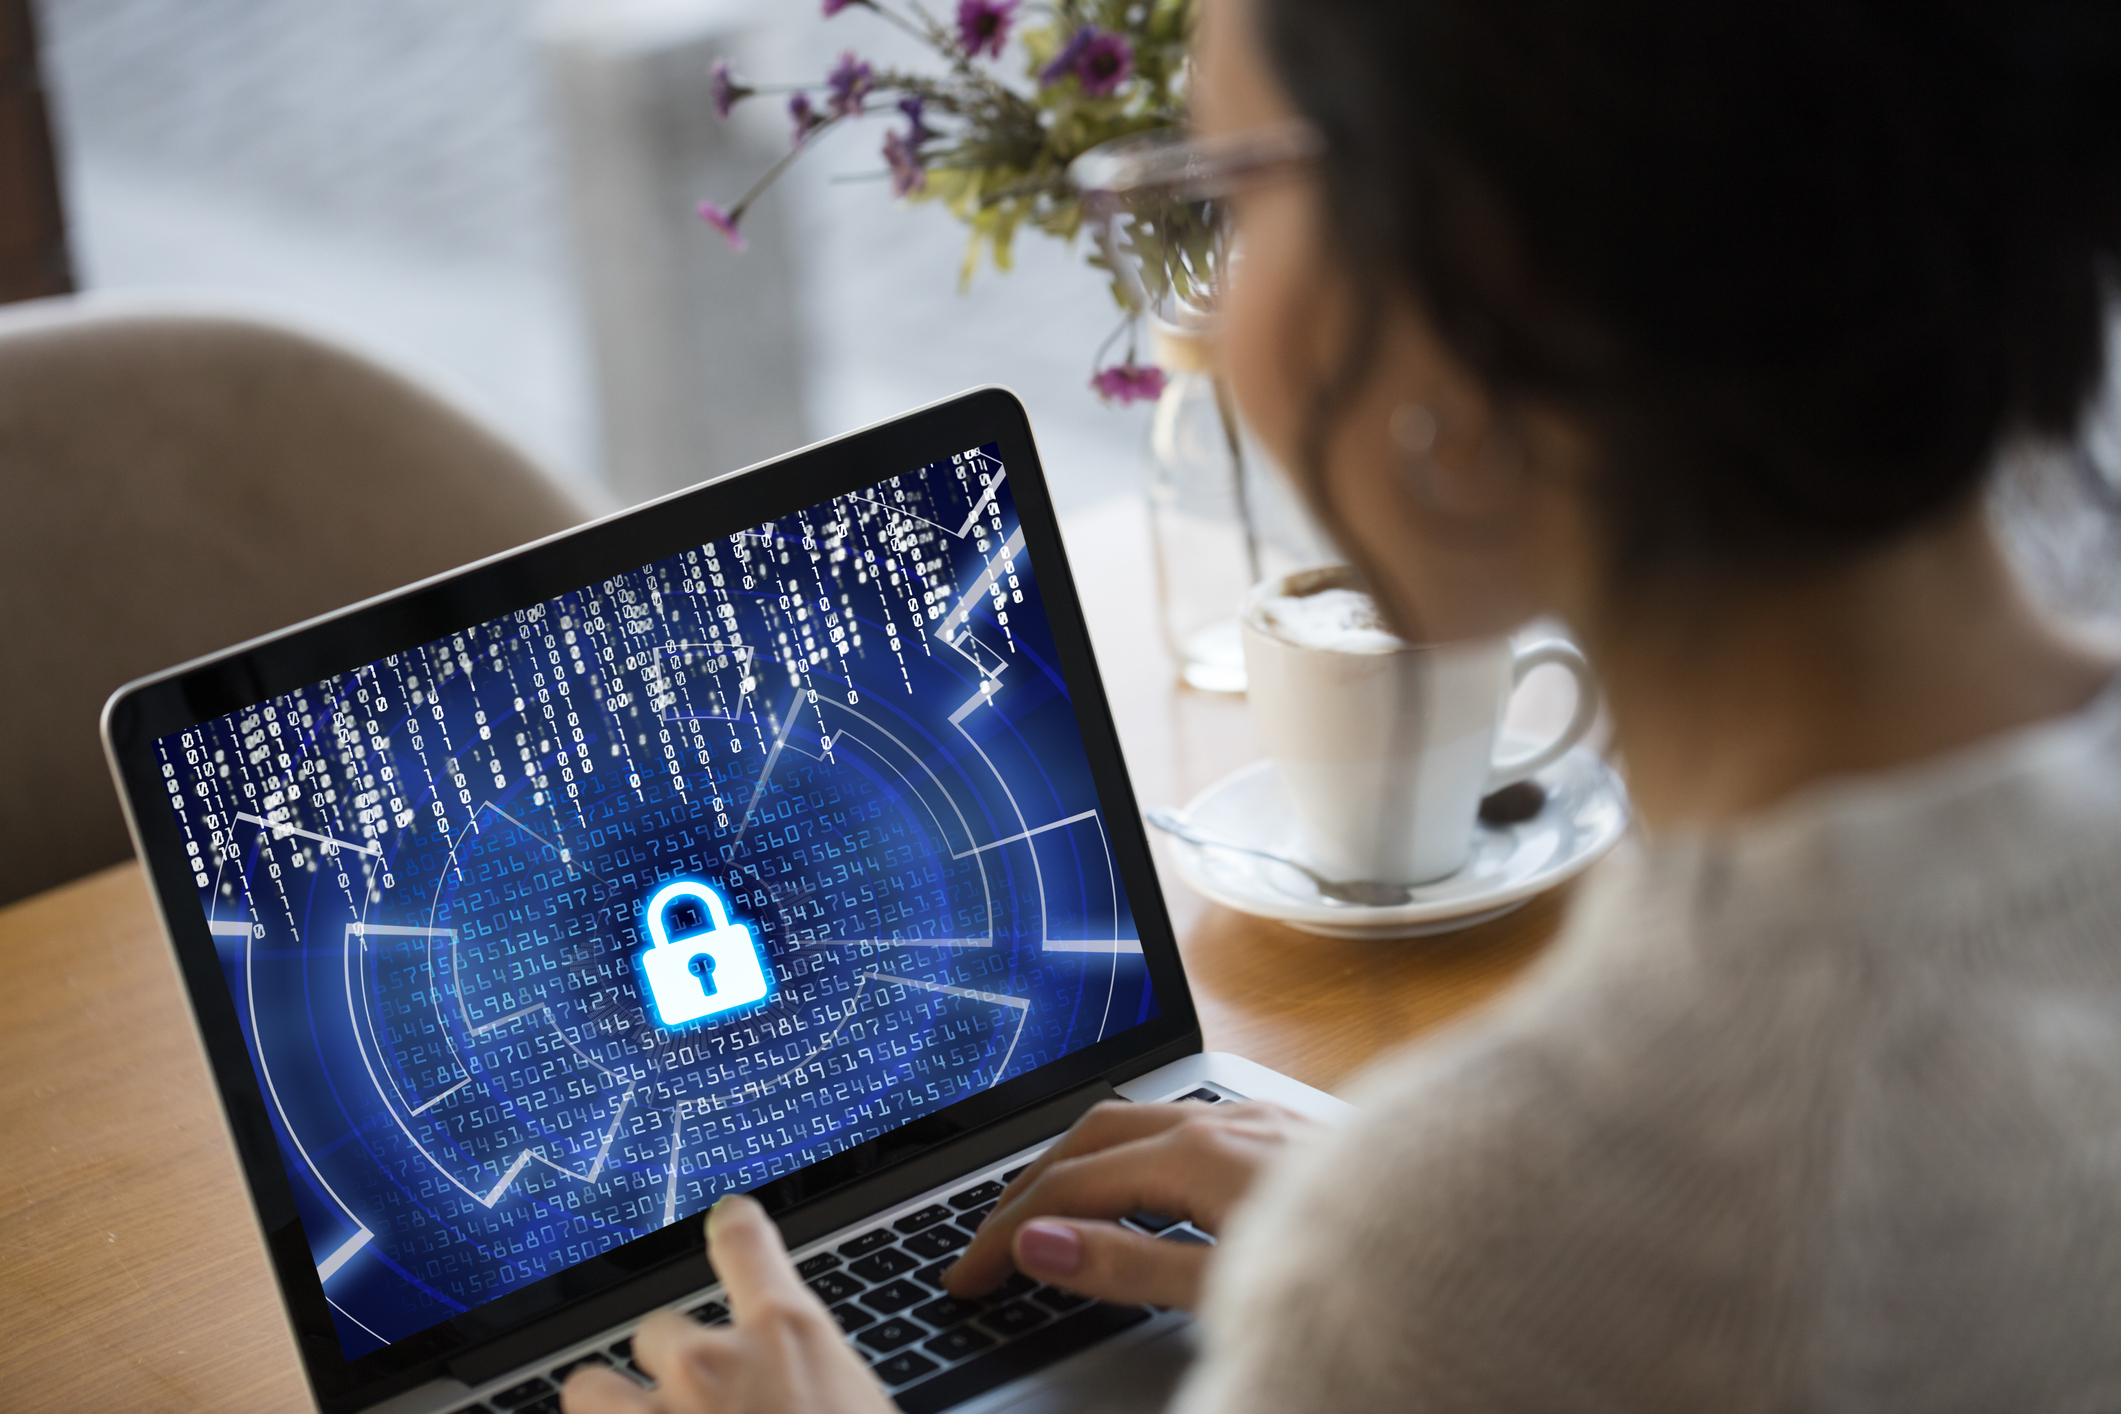 3 cybersecurity tips for working from home